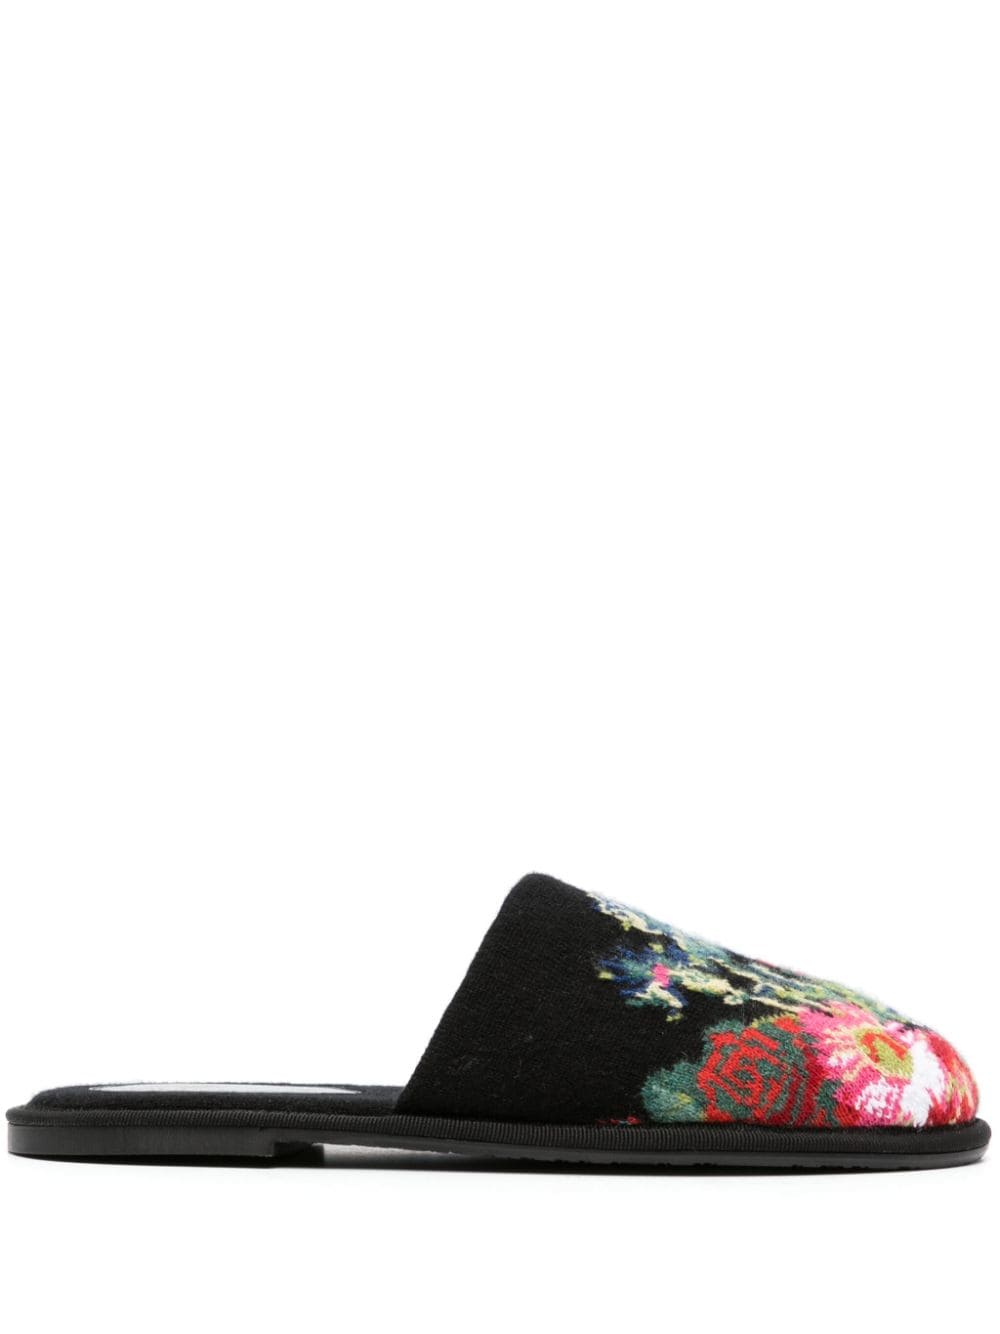 Barrie floral intarsia-knit cashmere slippers - Black von Barrie